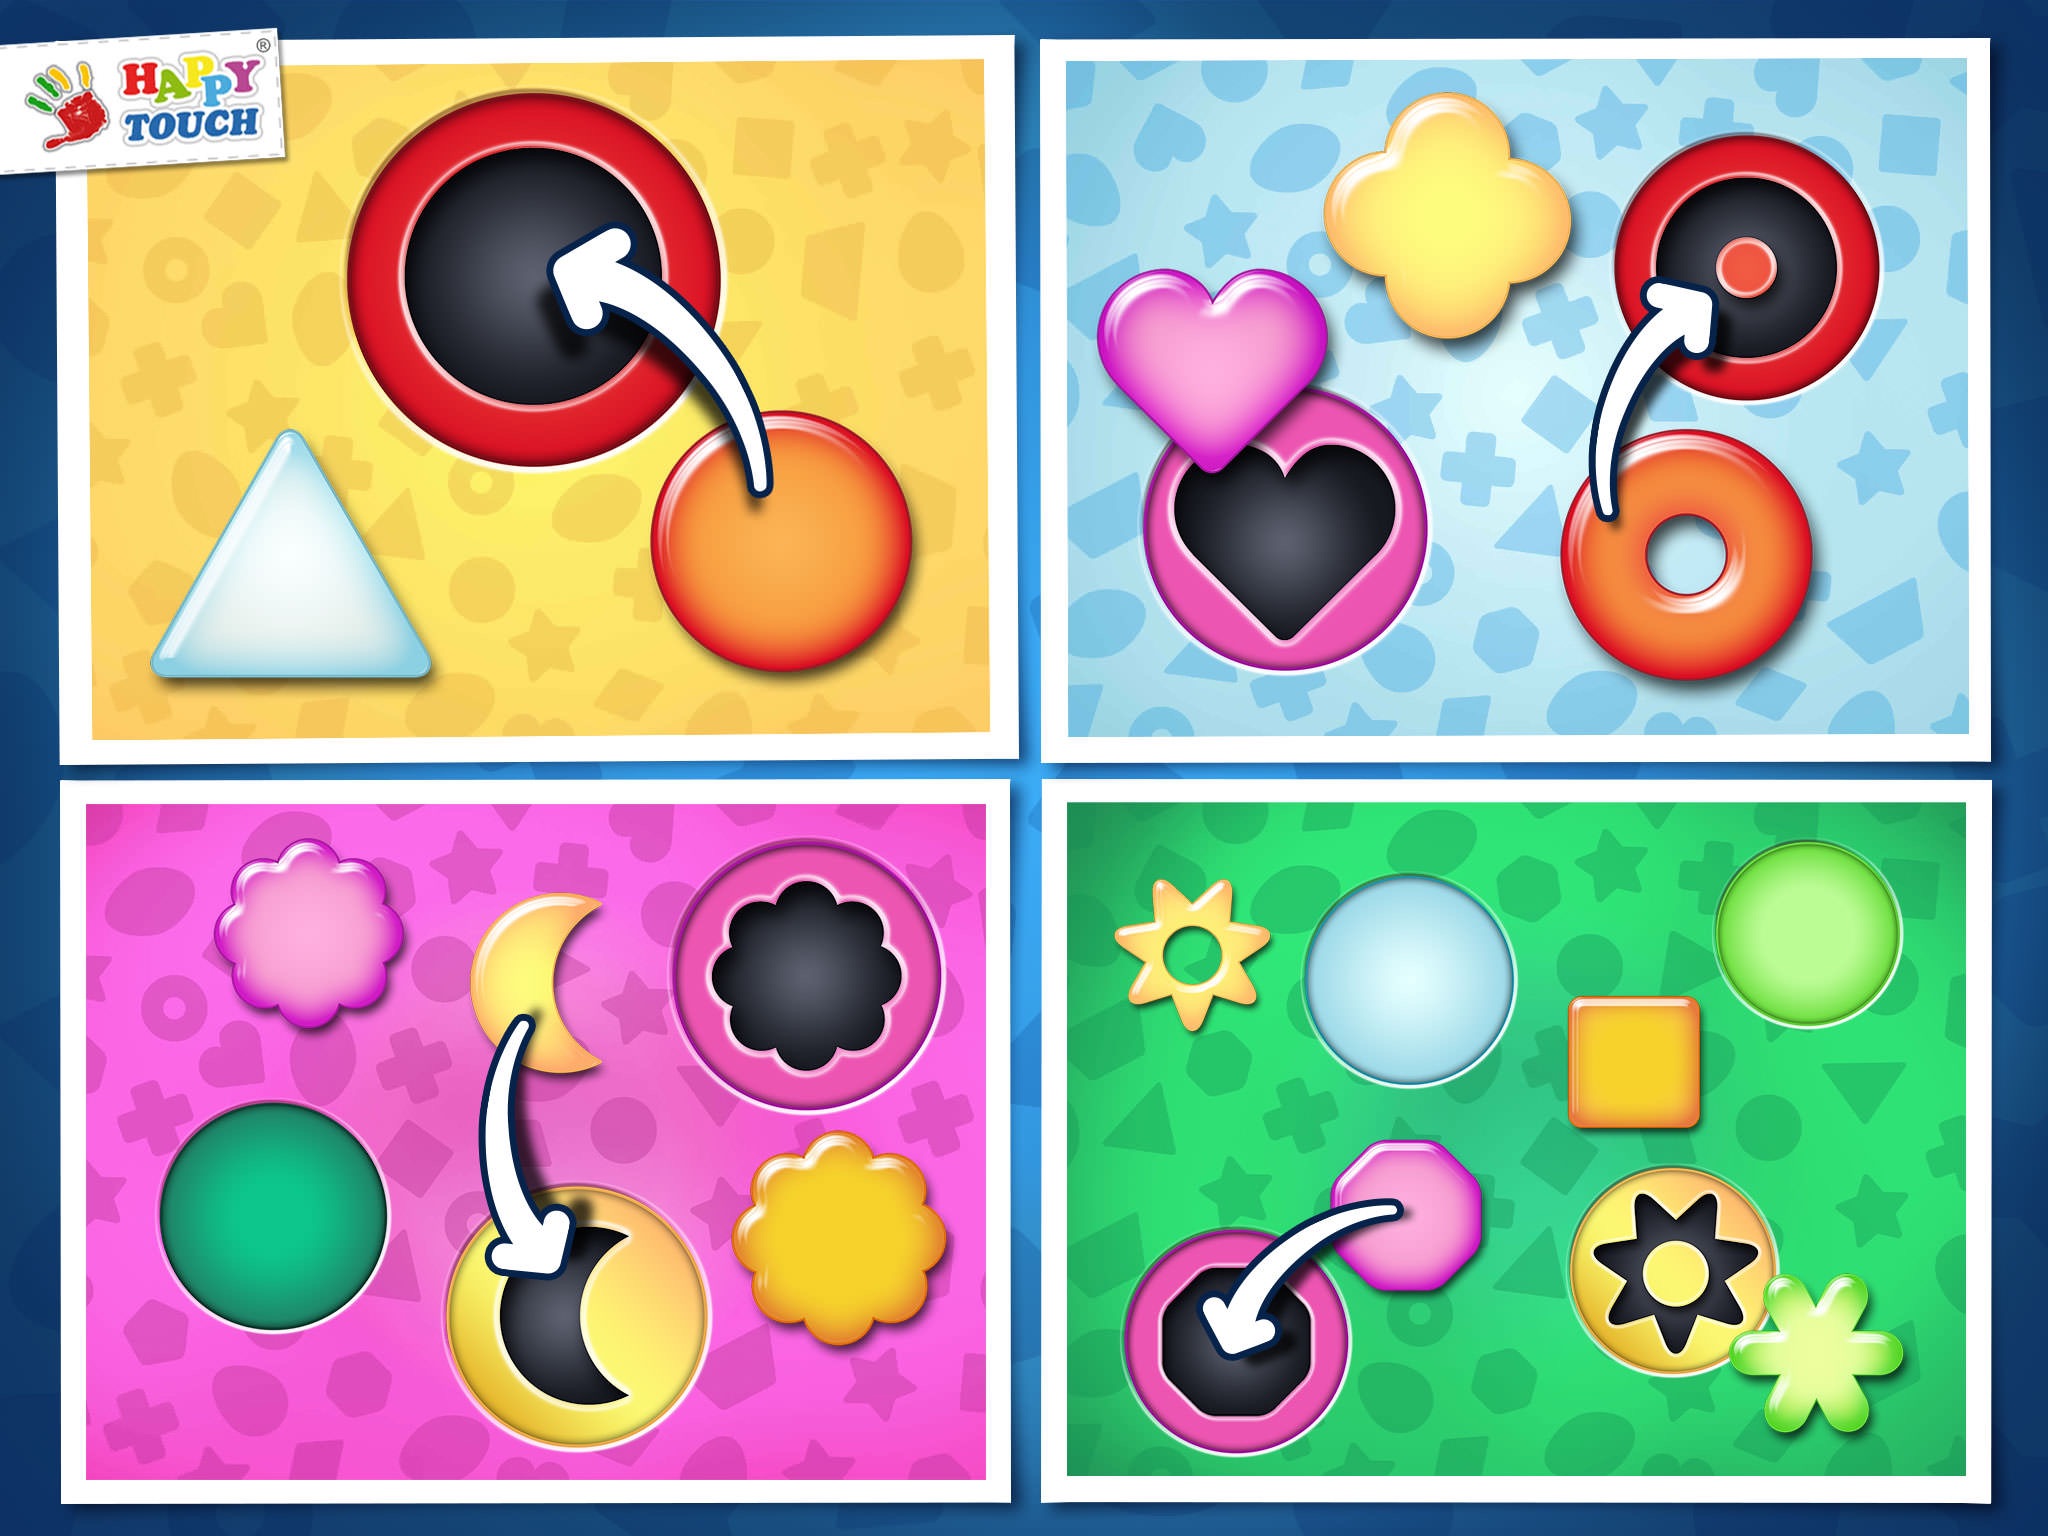 A funny Color and Shapes Game by Happy-Touch® Free screenshot 3